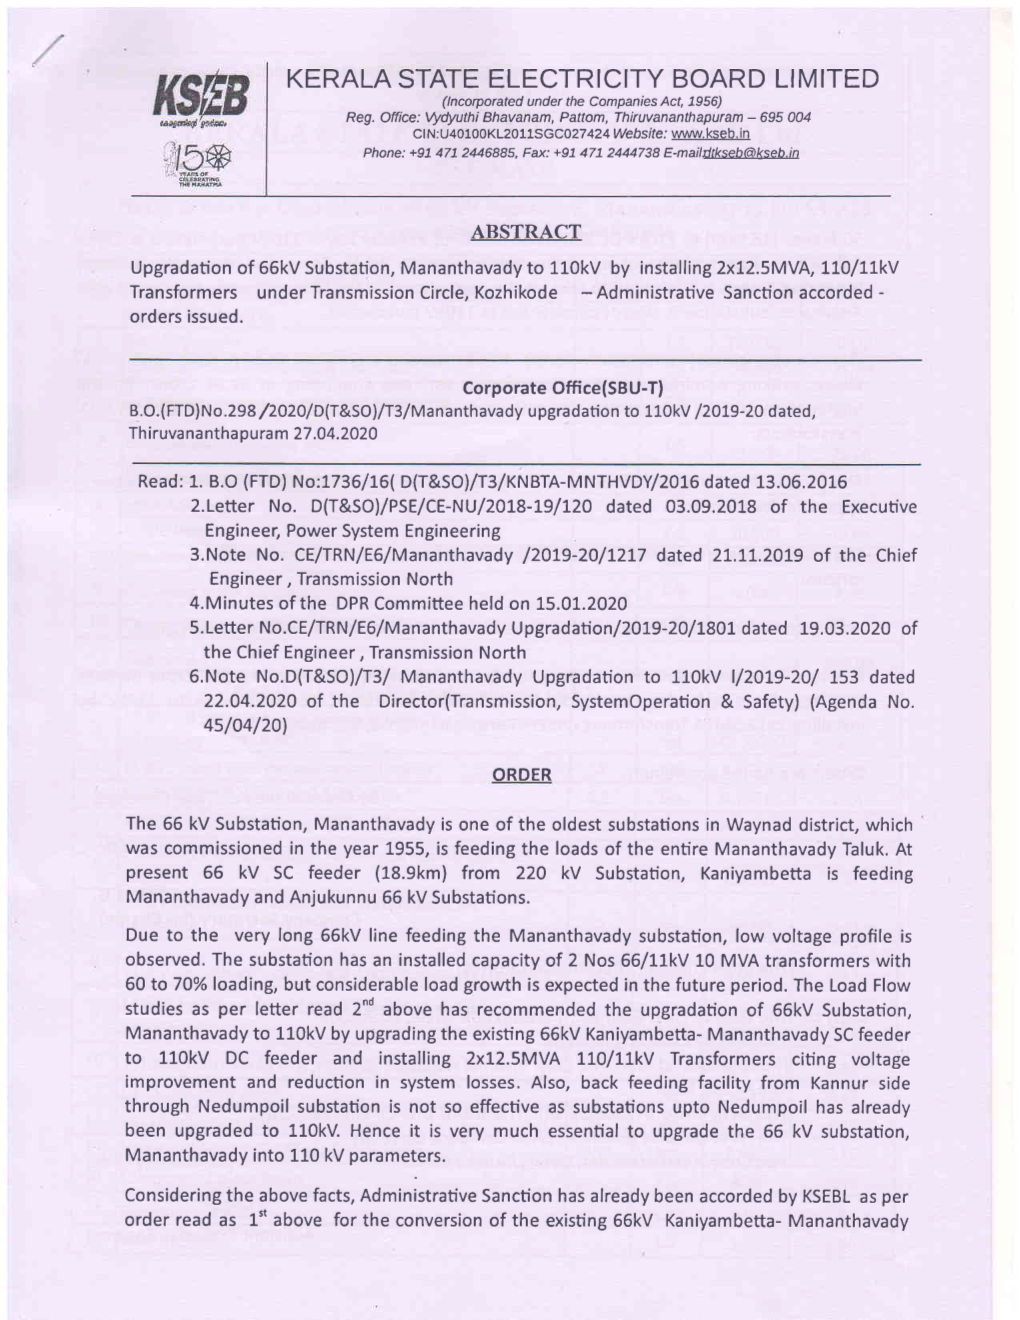 KERALA STATE ELECTRICITY BOARD LIMITED (Lncorporated Under the Companies Act, 1956) Reg